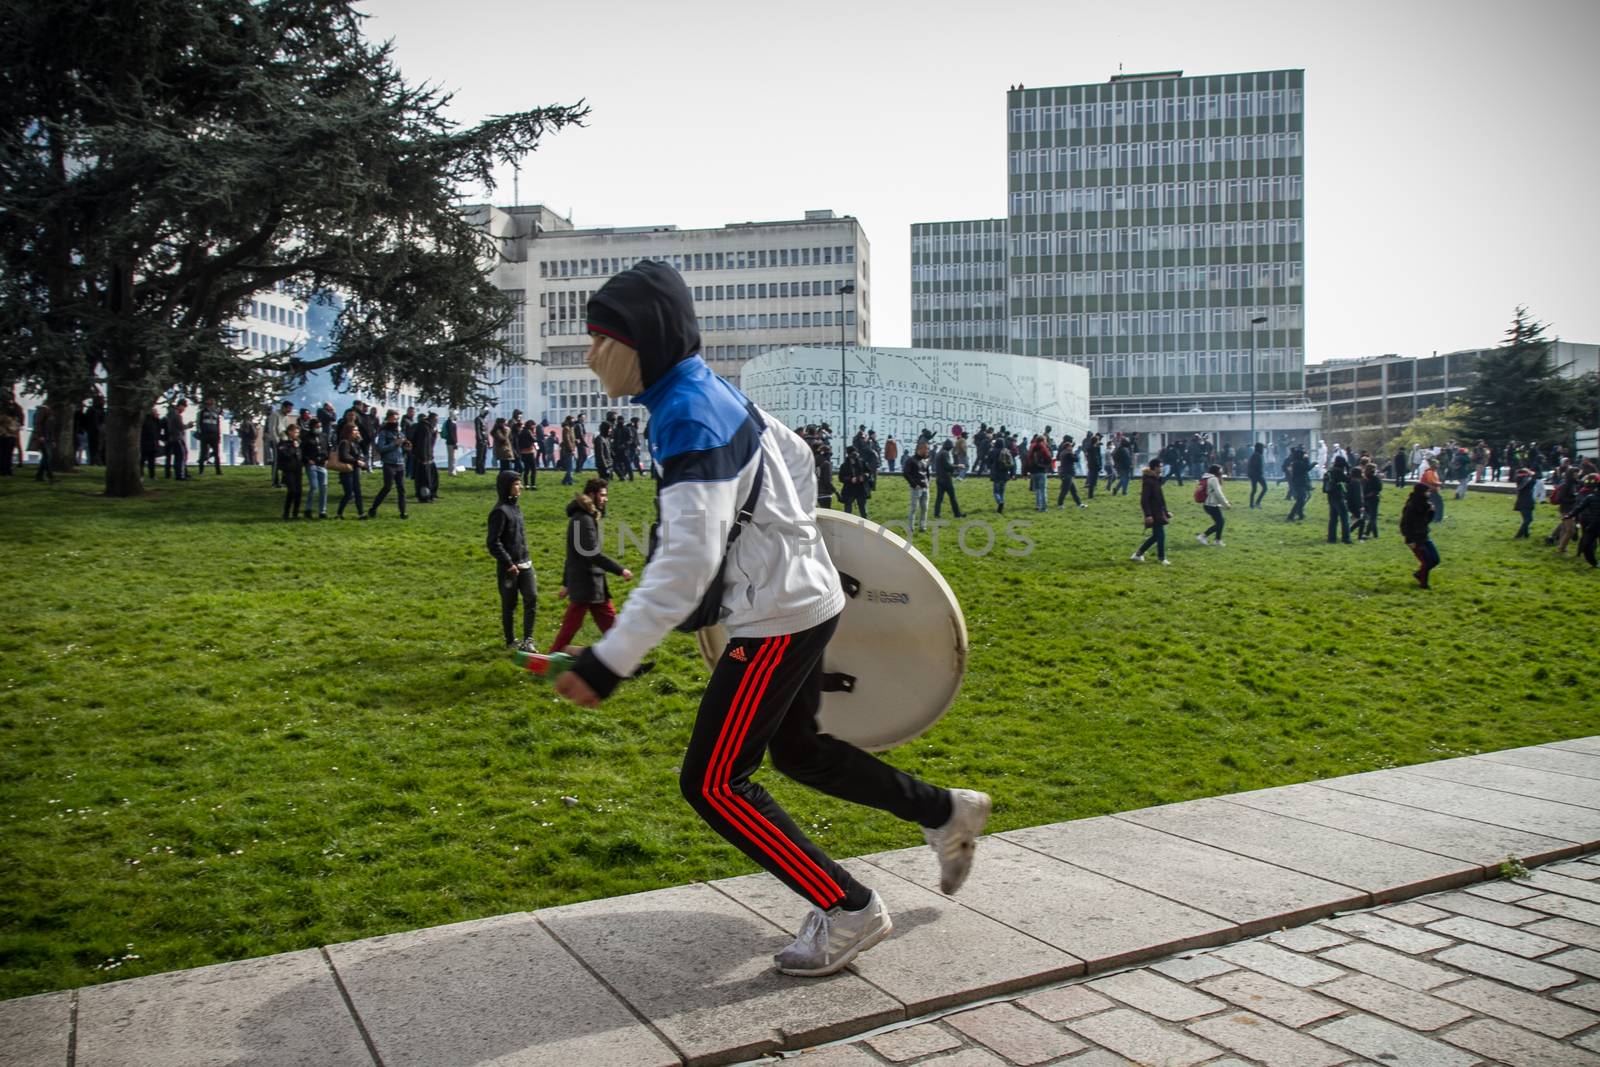 FRANCE, Nantes: A masked protester runs with a shield during a demonstration on April 9, 2016 in Nantes, western France, against the French government's proposed labour law reforms. Fresh strikes by unions and students are being held across France against proposed reforms to France's labour laws, heaping pressure on President Francois Hollande who suffered a major defeat over constitutional reforms on March 30. 